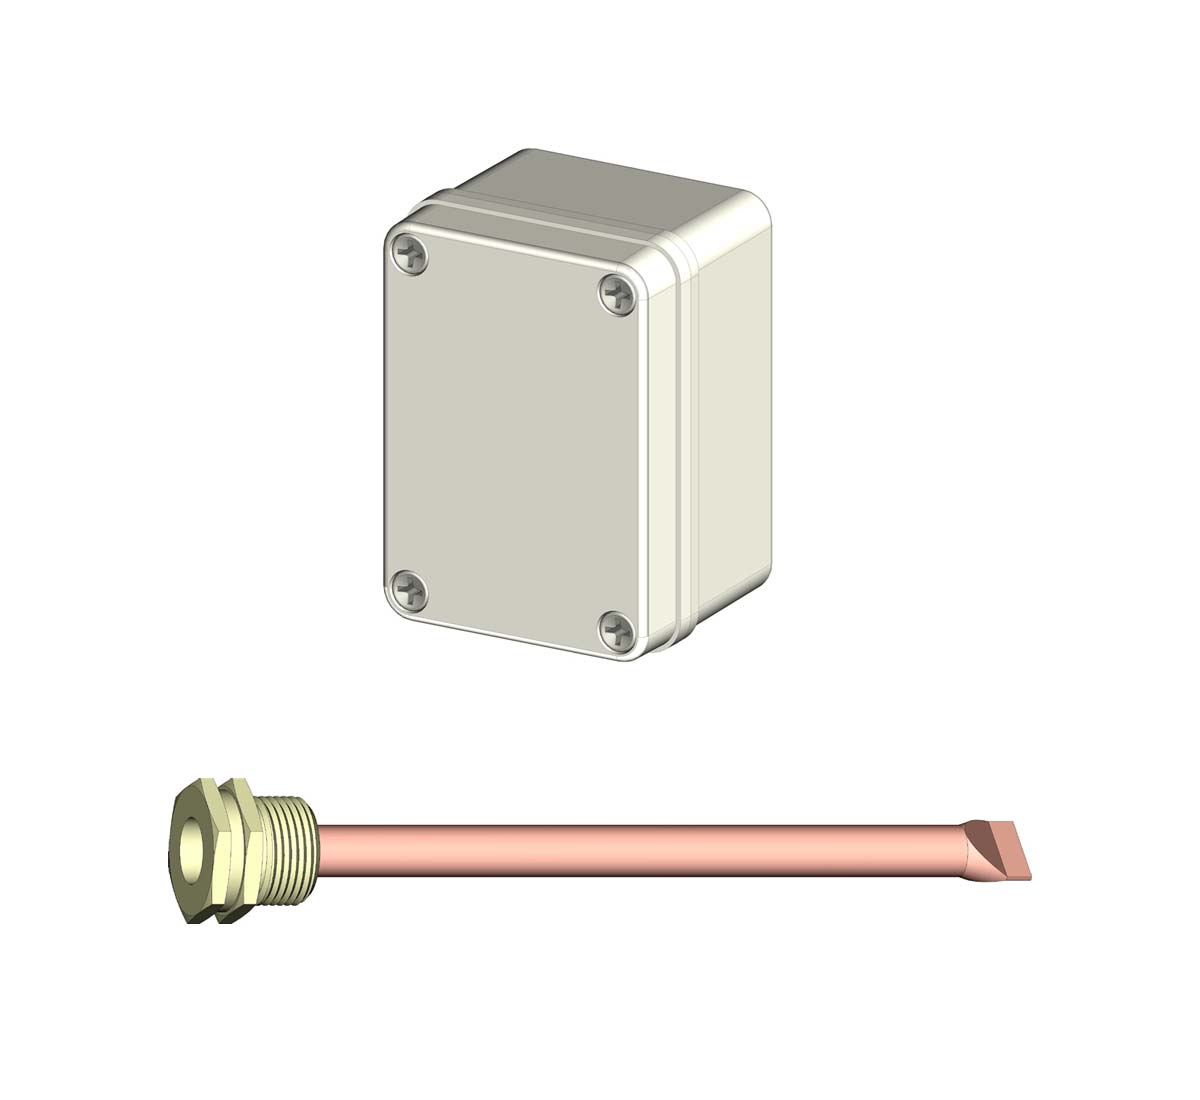 A picture of Backer terminal box KT and thermostat tubes for rod-type thermostats